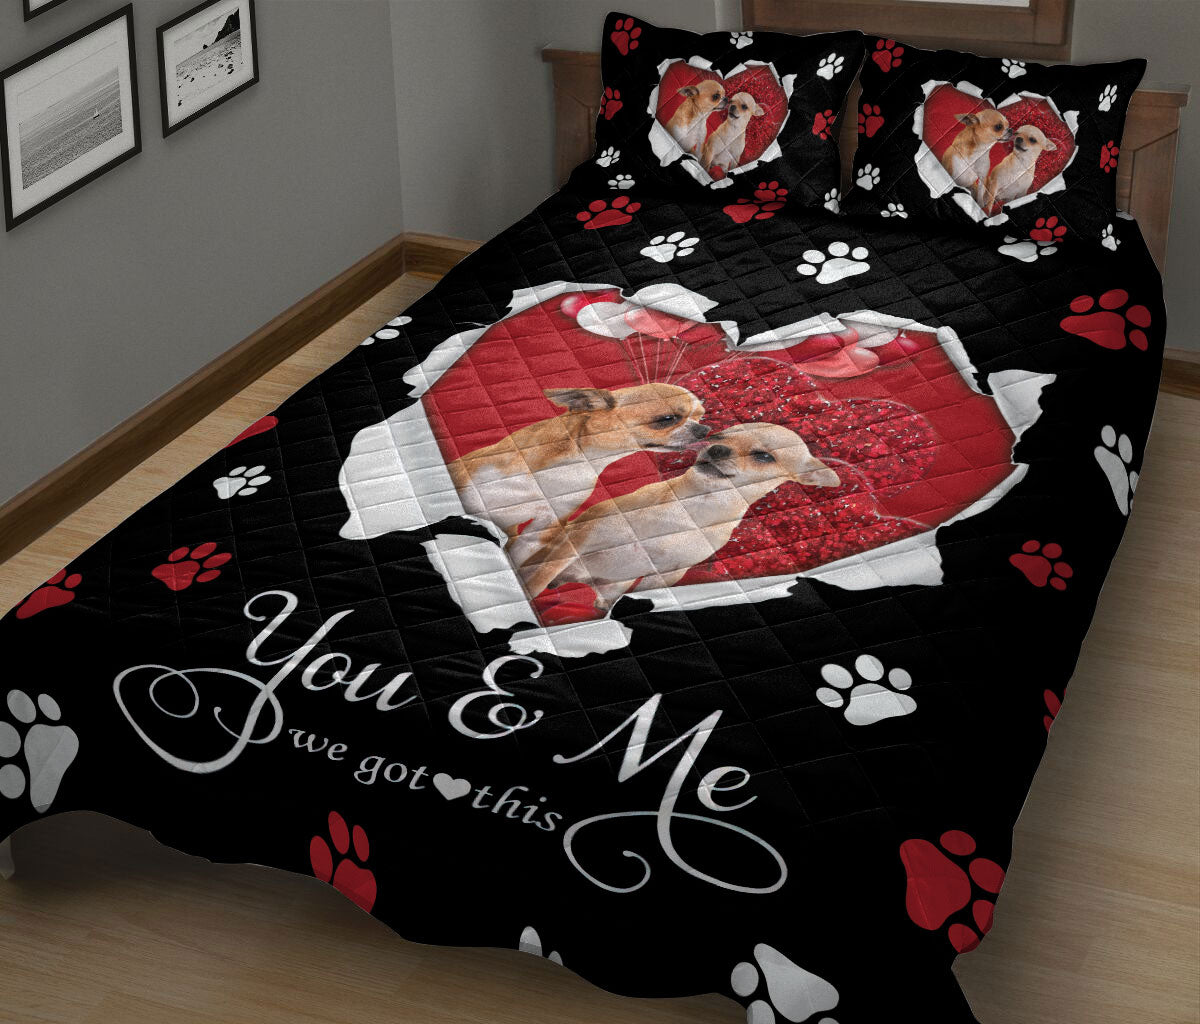 Ohaprints-Quilt-Bed-Set-Pillowcase-Dachshund-Weiner-Doxie-Couple-Dog-Lover-Love-Adorable-Heart-Blanket-Bedspread-Bedding-200-King (90'' x 100'')